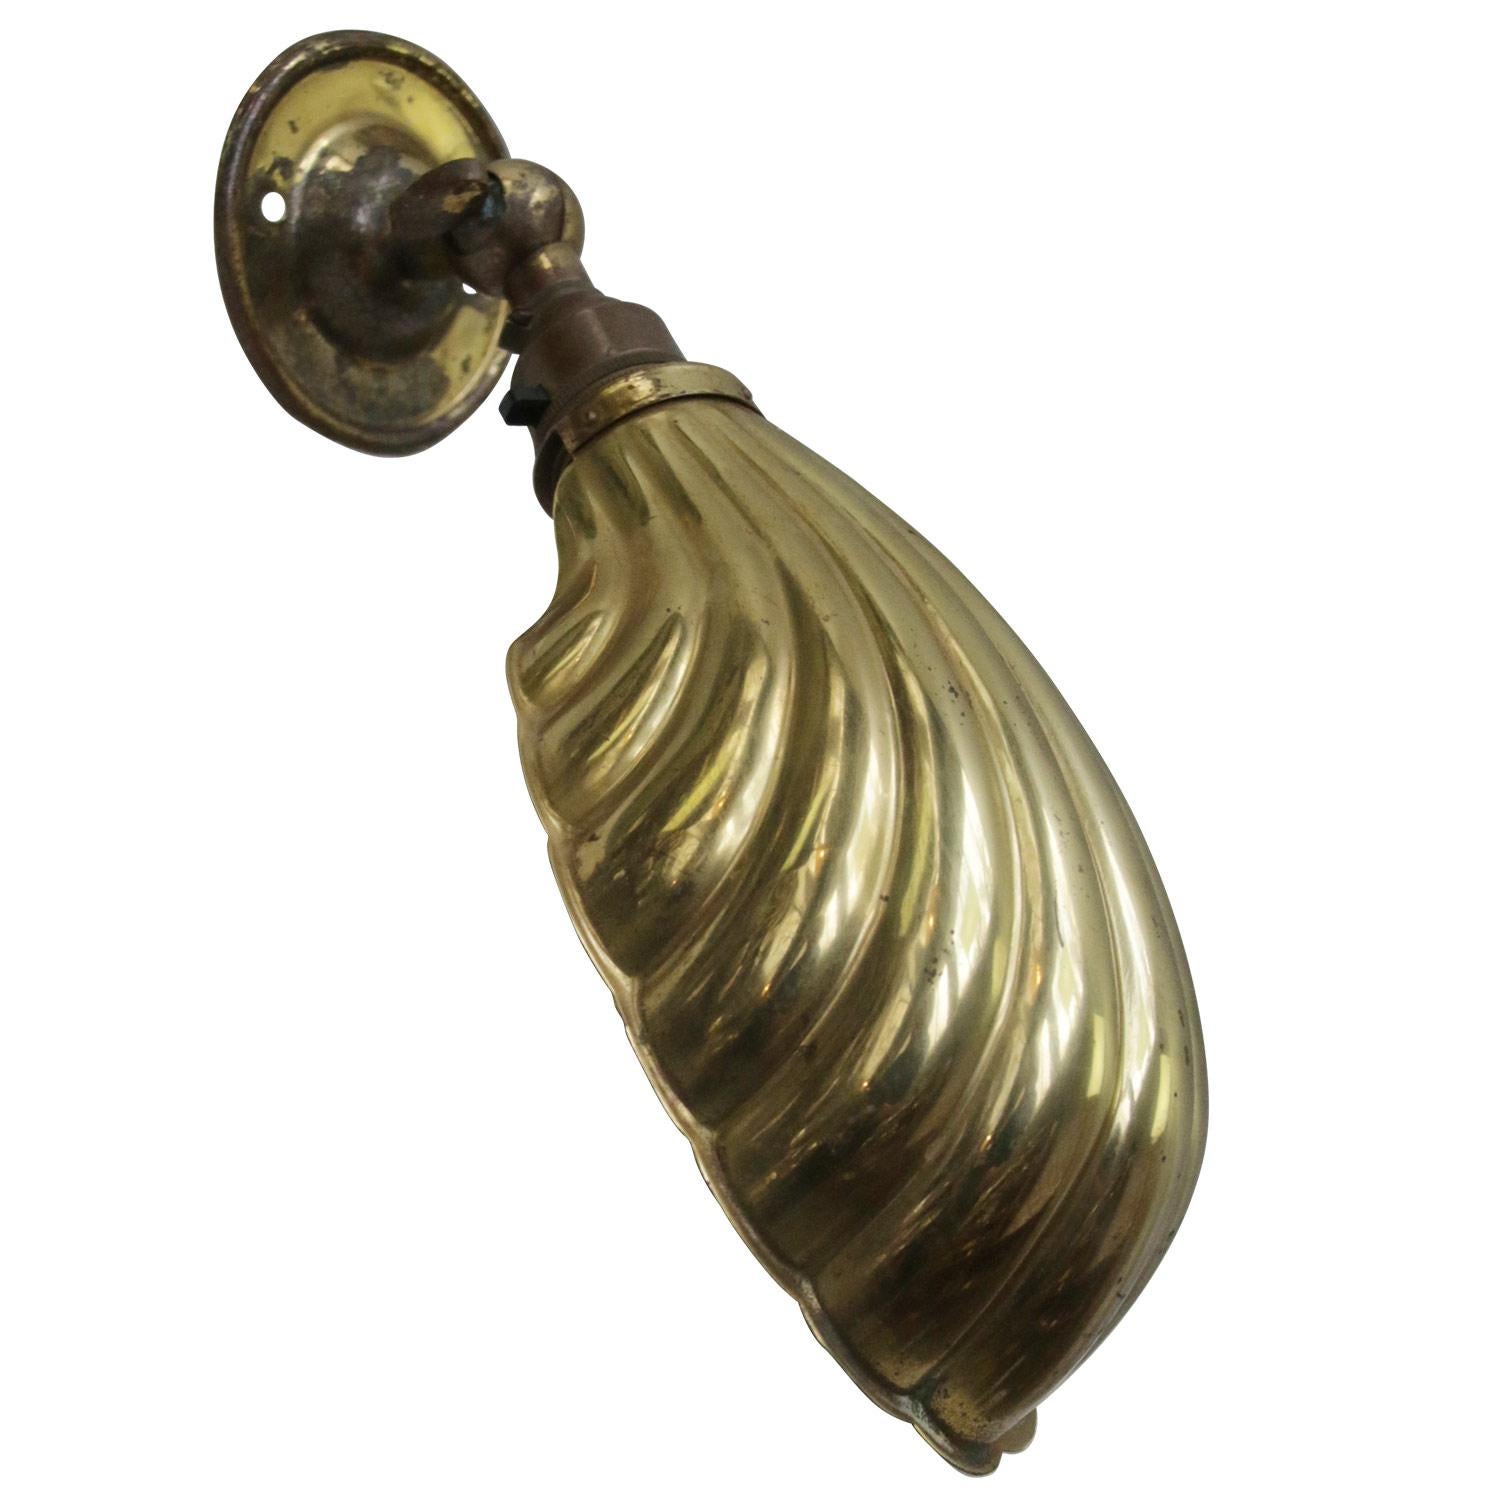 Vintage French brass wall light
Brass E14 Bayonet bulb holder

Weight: 0.40 kg / 0.9 lb

E14 Bayonet bulb holder. Priced per individual item. All lamps have been made suitable by international standards for incandescent light bulbs,